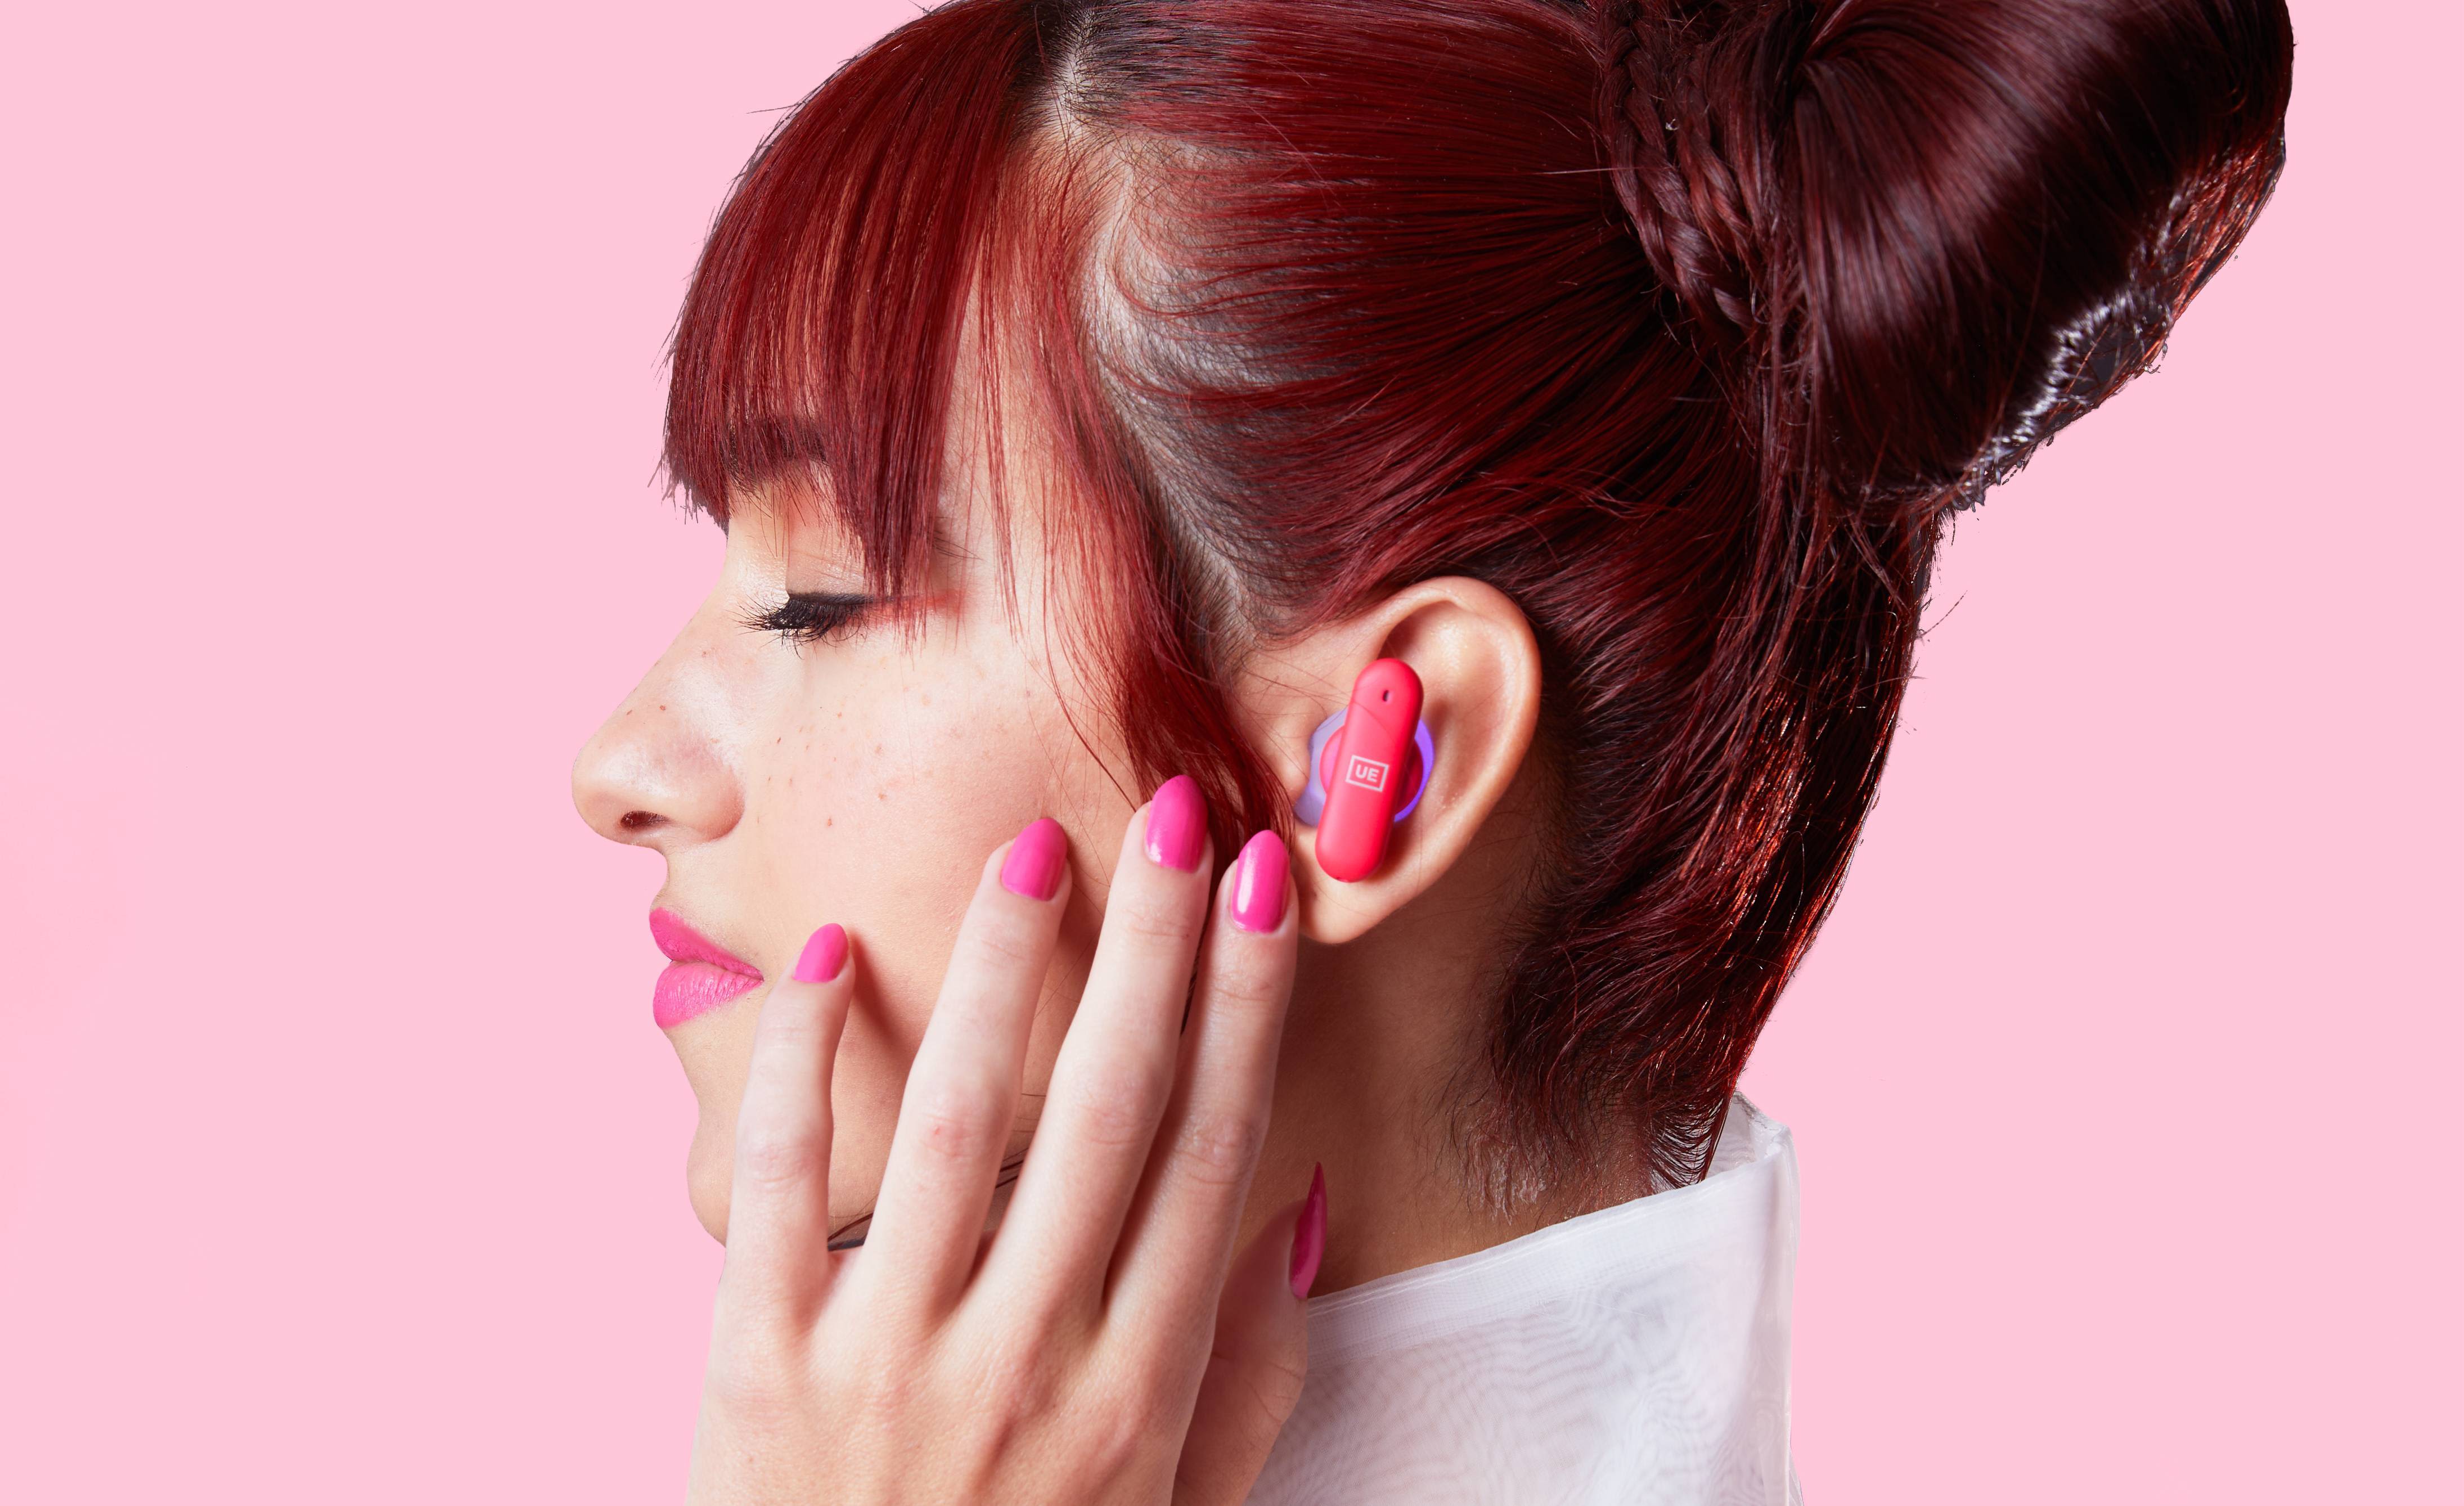 The custom-fitting UE Fits earbuds now come in stylish hot pink | CNN Underscored